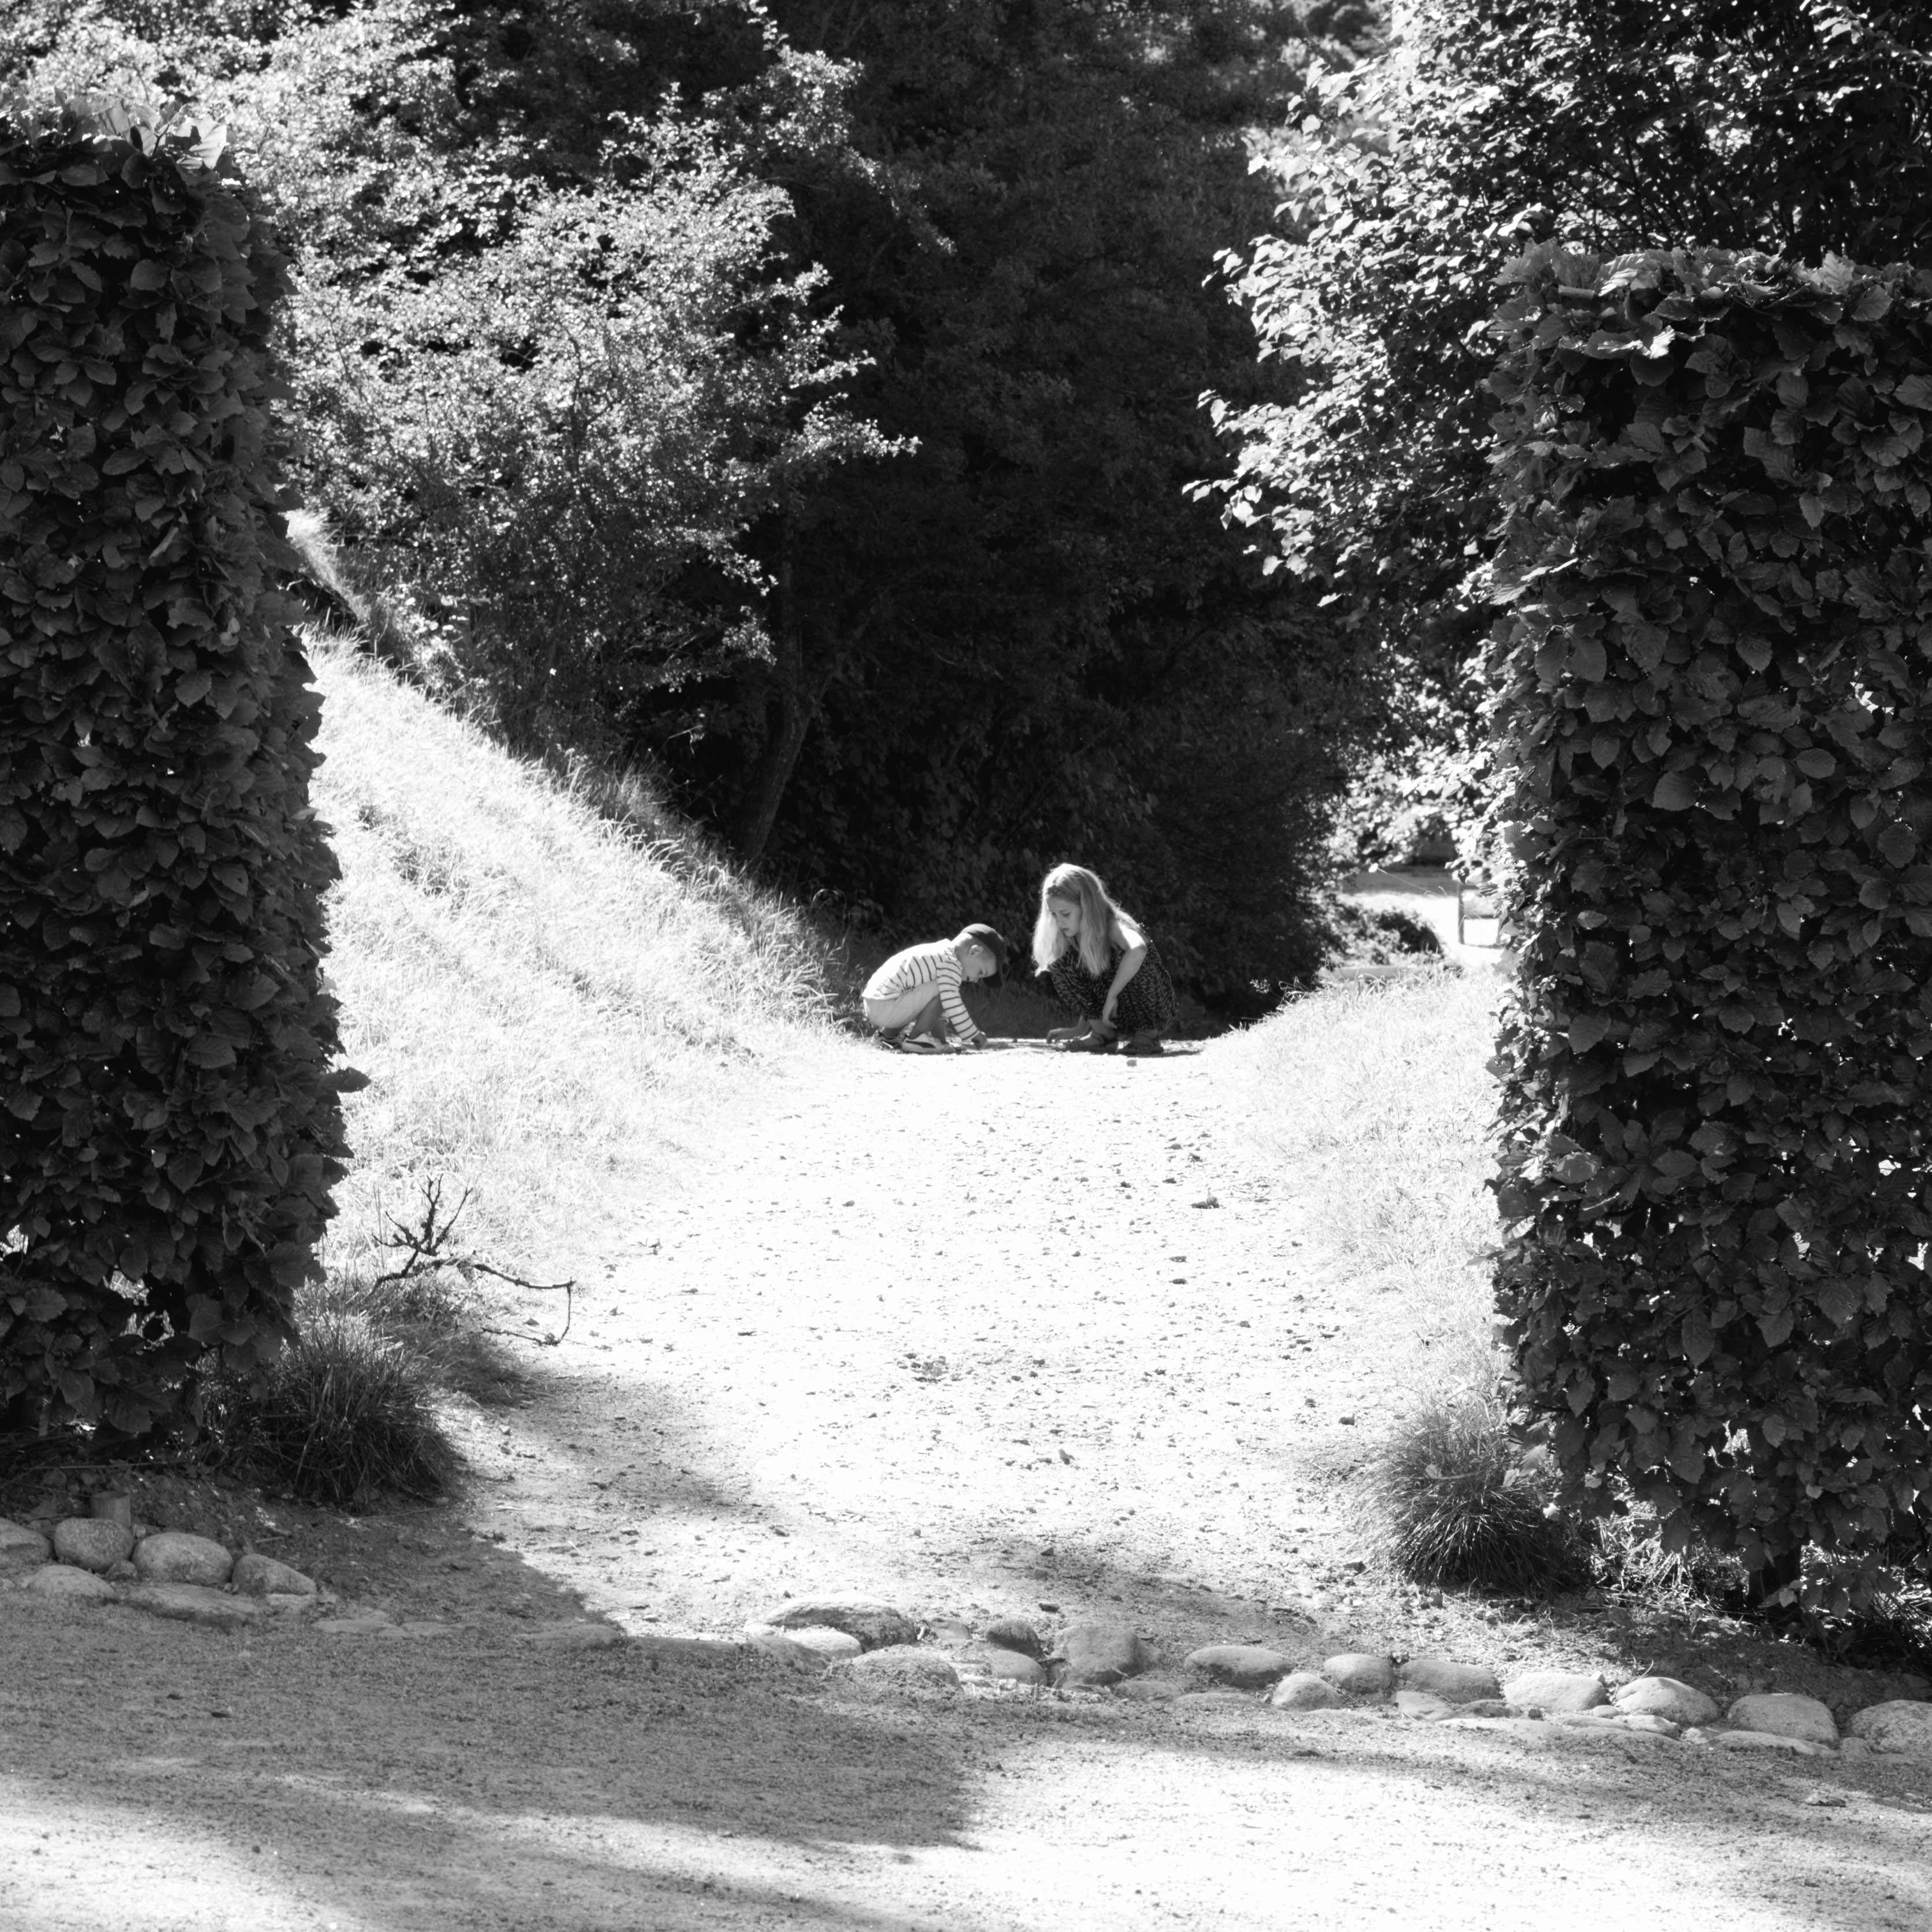 A hole in the hedge at Gunnebo (Mölndal, Sweden) with Leica M Monochrom (Leica Macro-Elmar-M 90mm f/4) by Magnus L Andersson (photography.anderssoneklund.se) at 2013-08-25 11:11:17